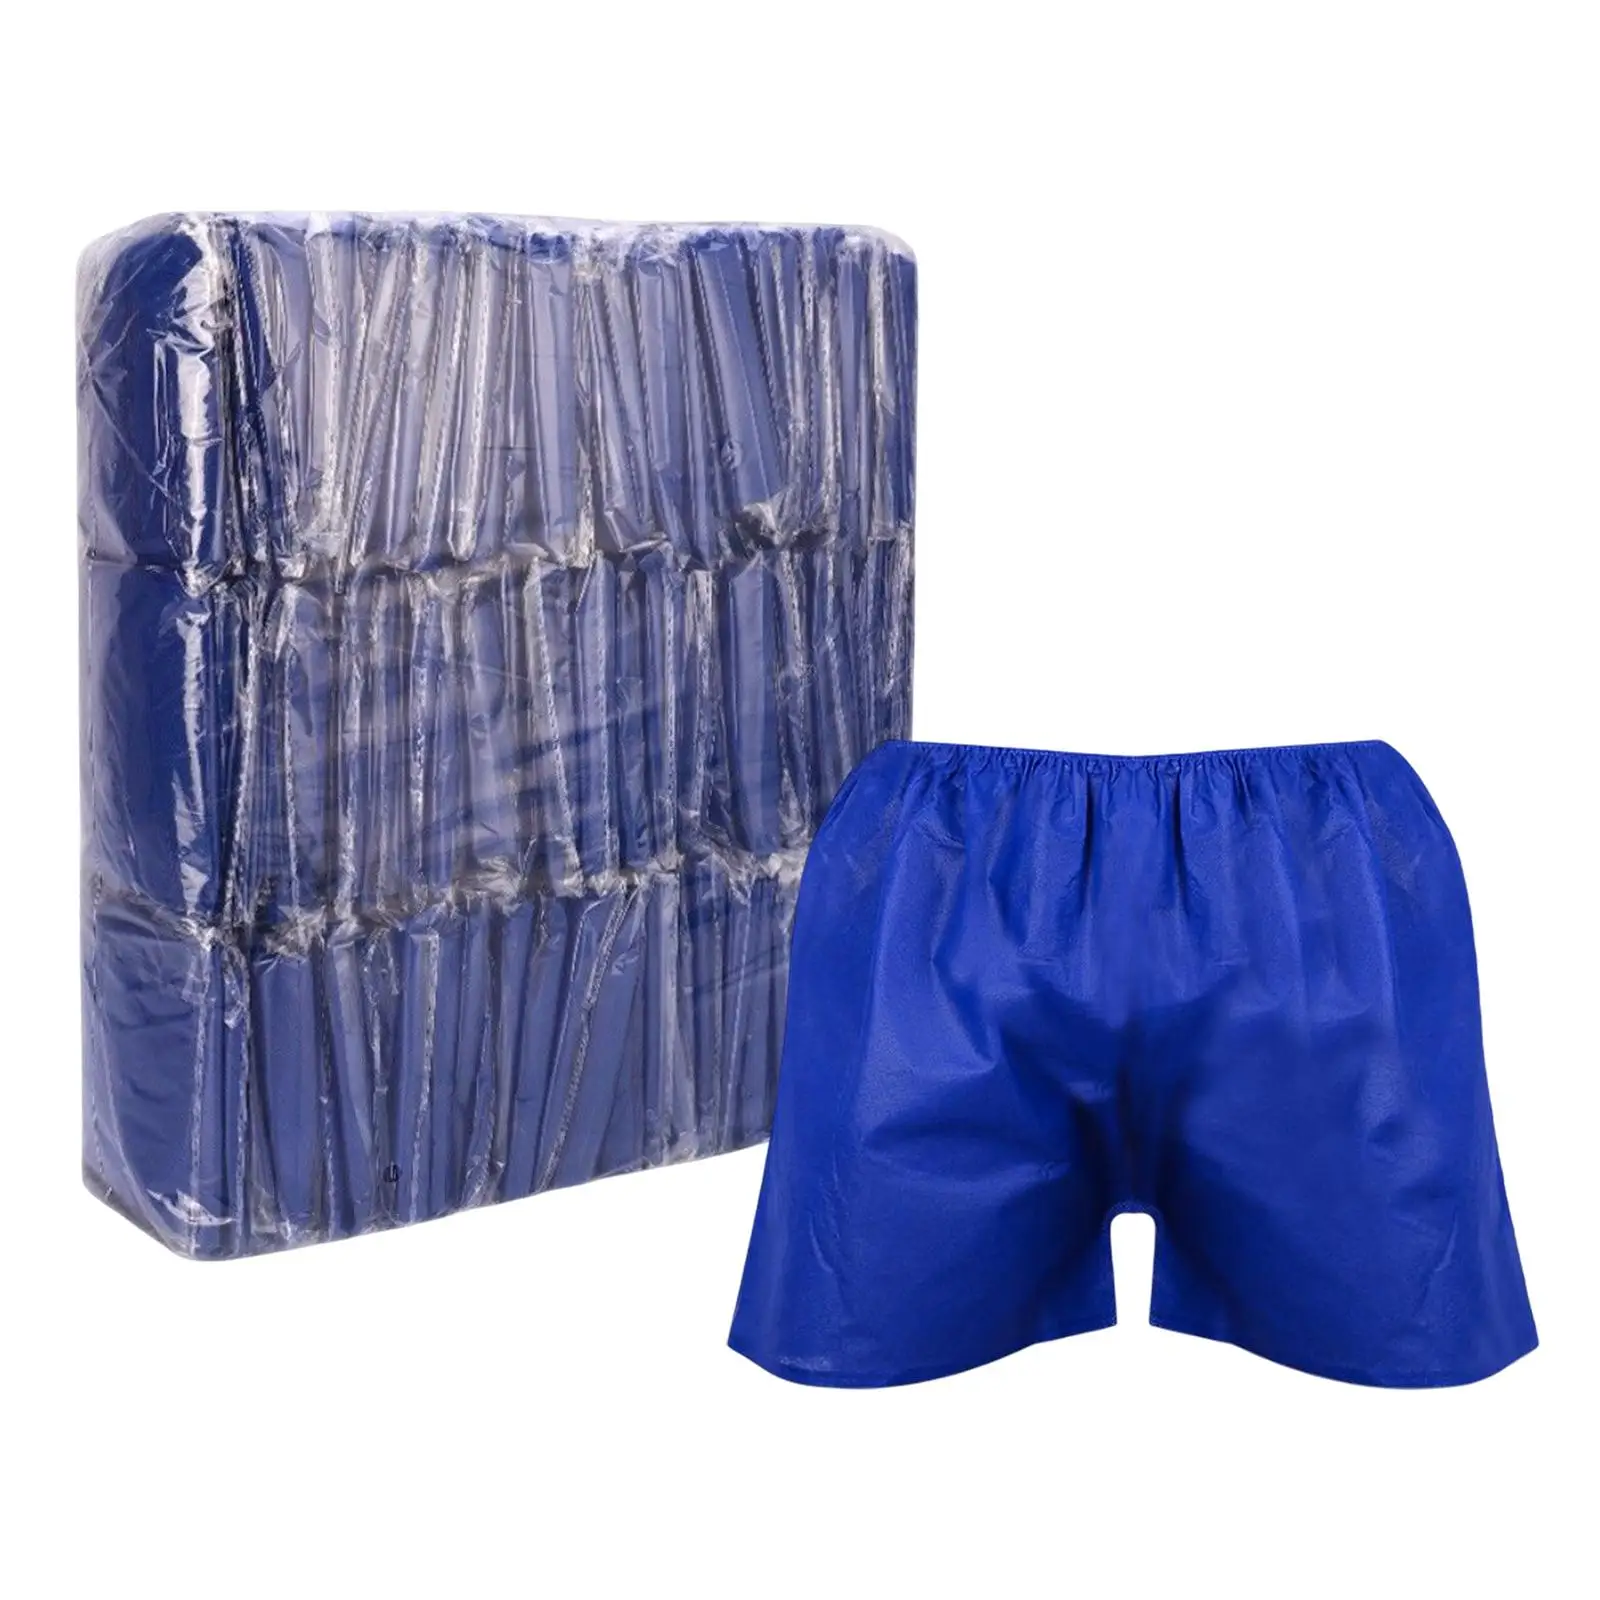 Men`s Boxer Shorts Adjustable Panties Underwear for Male Sauna Steaming Home